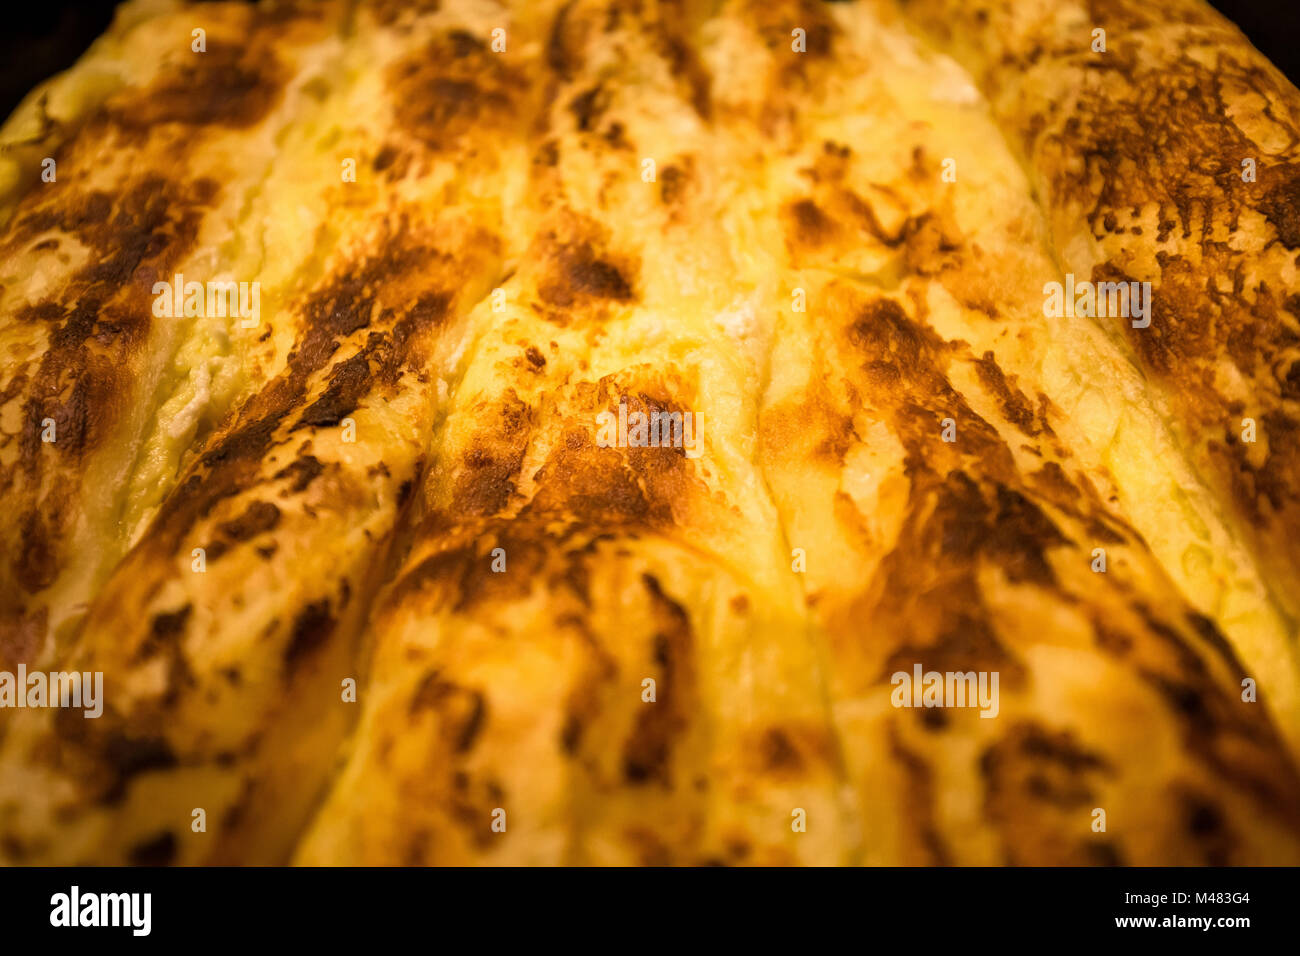 Cheese strudel domestic food from Croatia, layered pastry Stock Photo